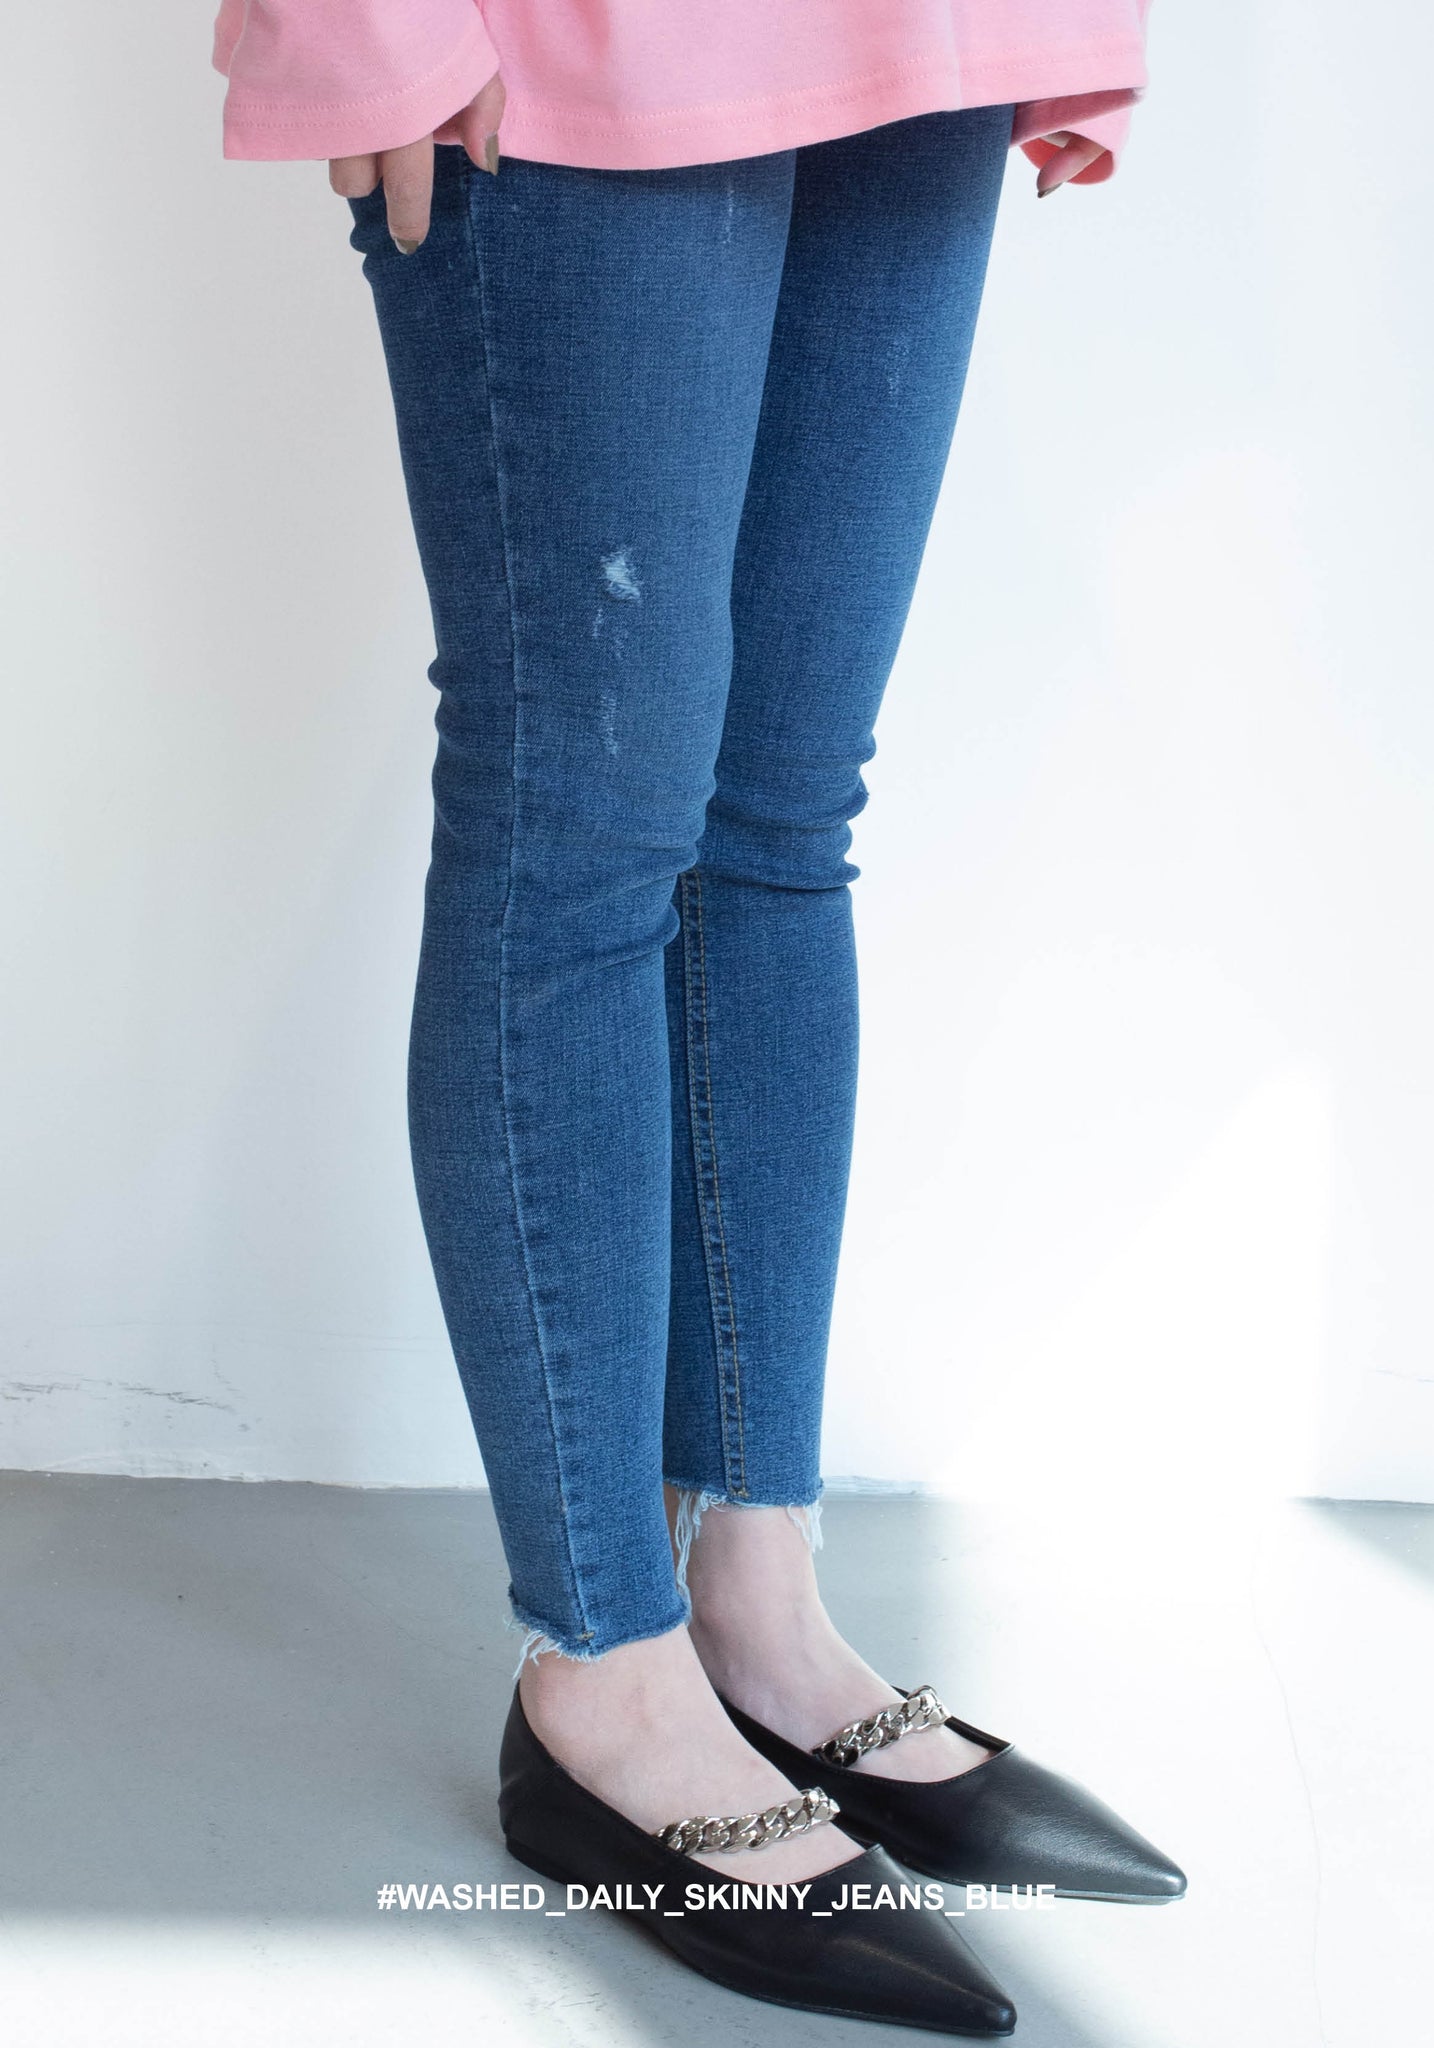 Washed Daily Skinny Jeans Blue - whoami